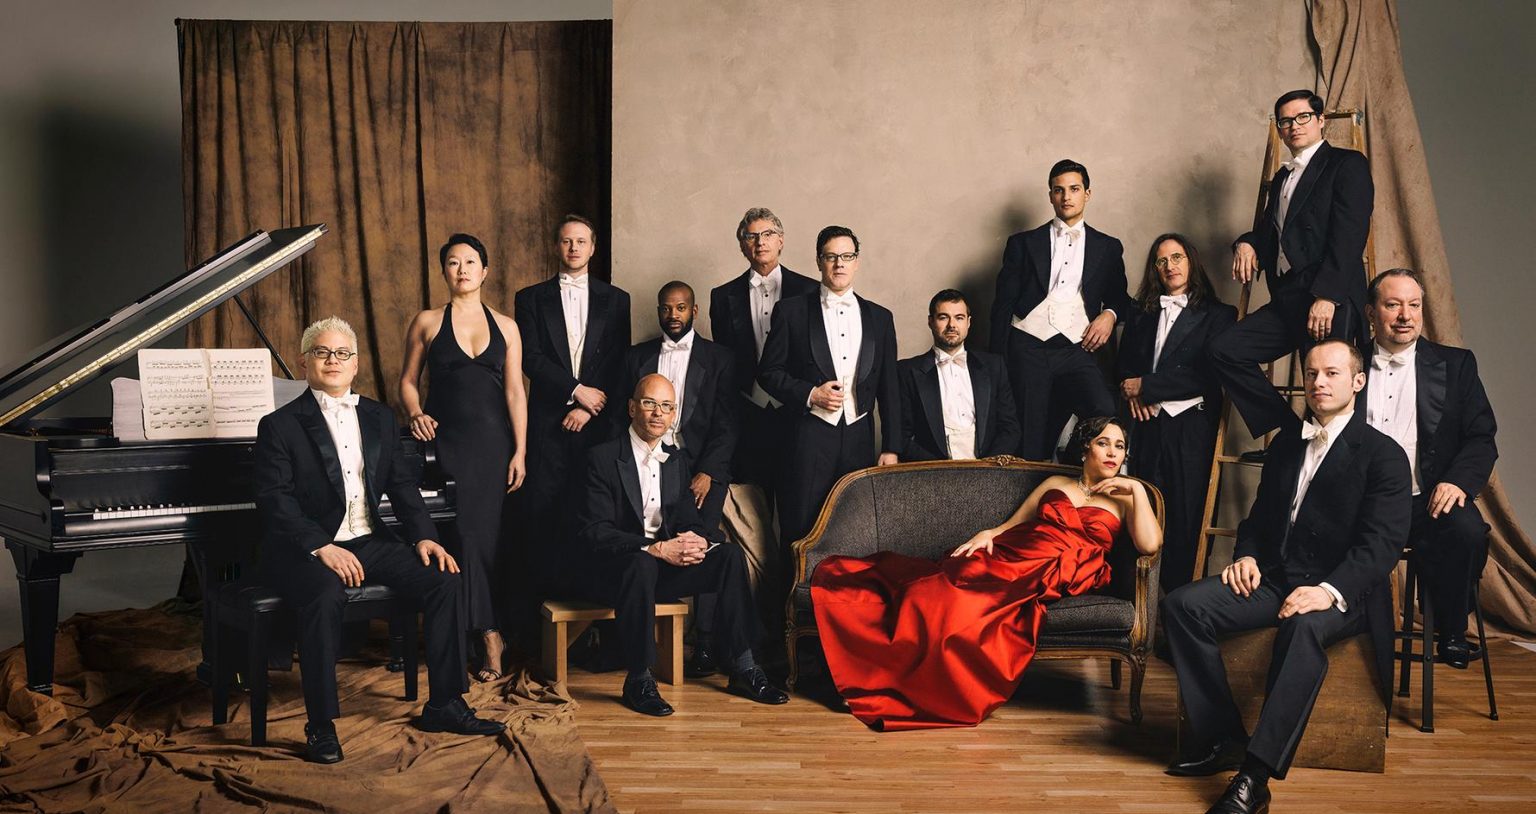 Pink martini tour 2022 / 2023 dates, tickets & more Vocal Bop